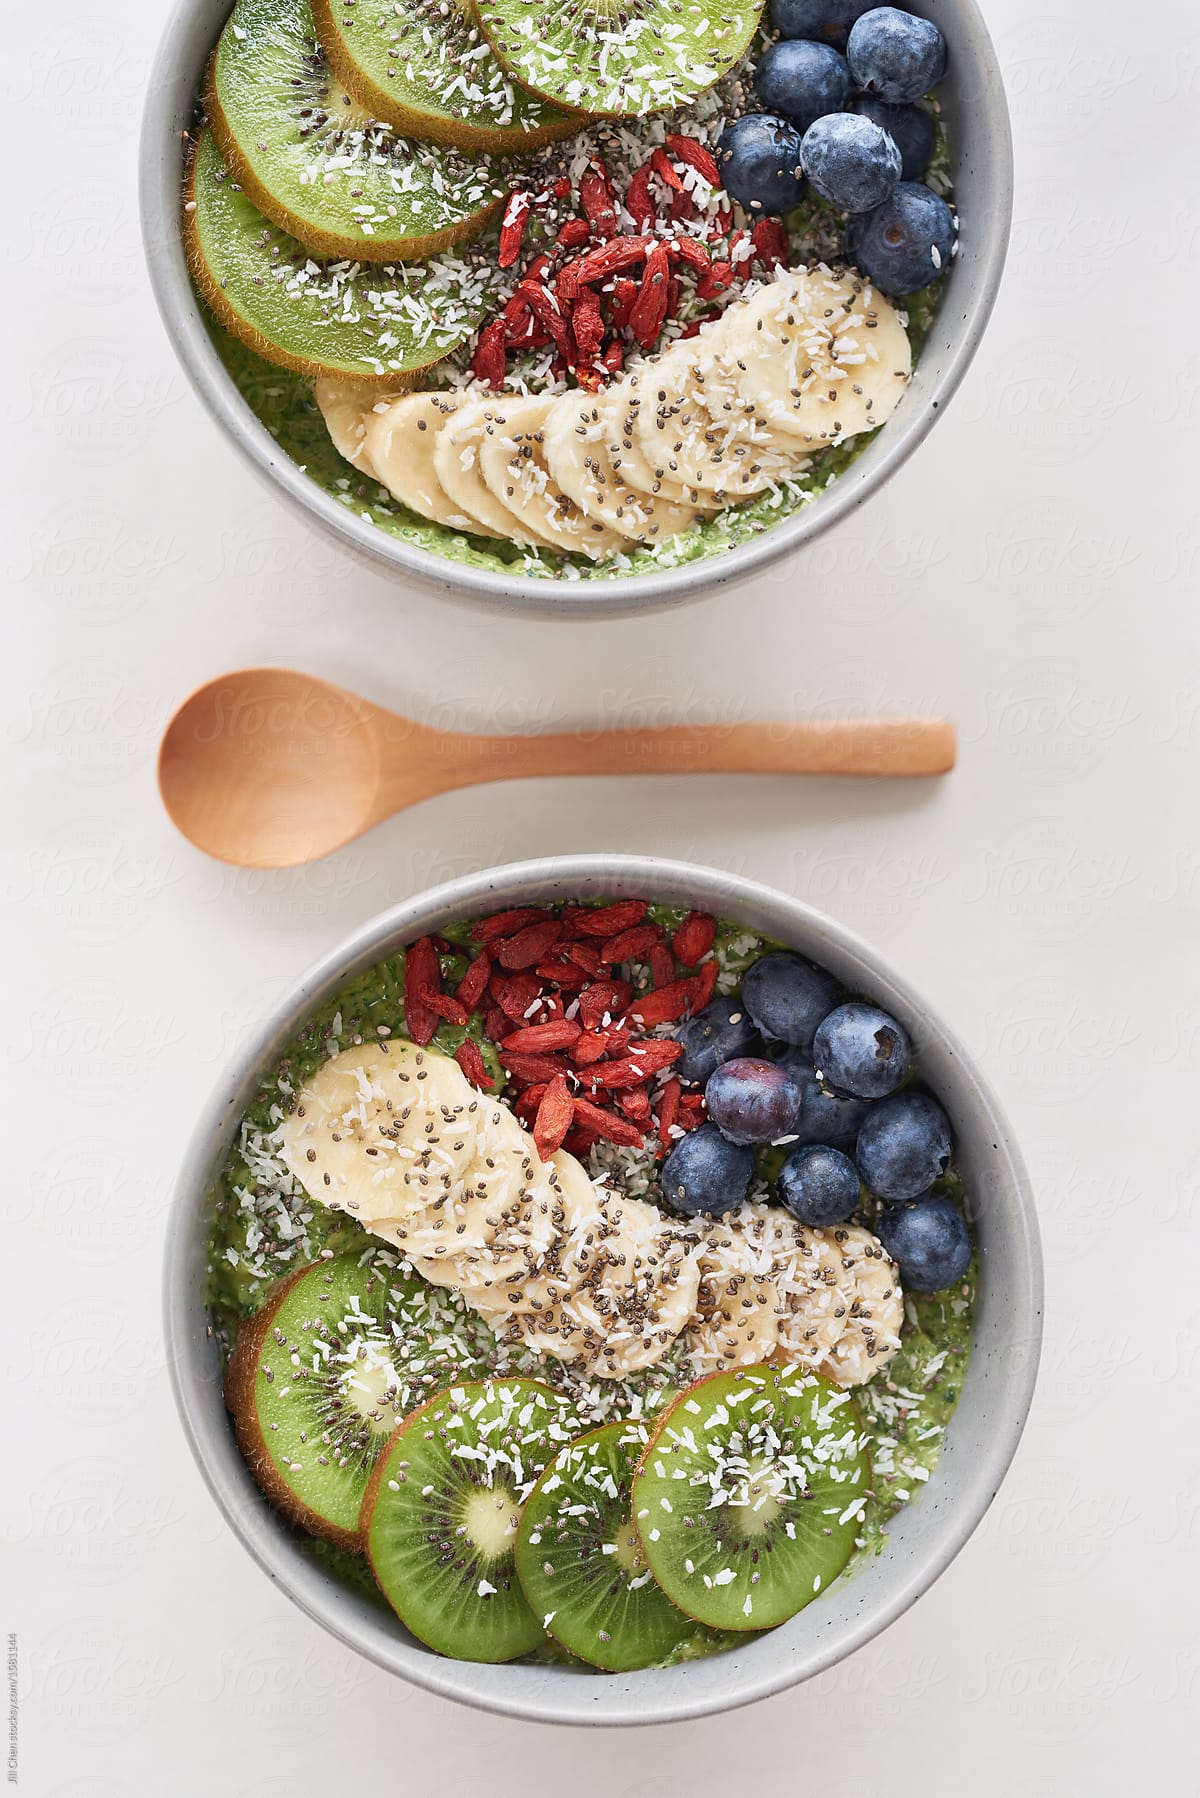 Green smoothie bowl with fresh fruit